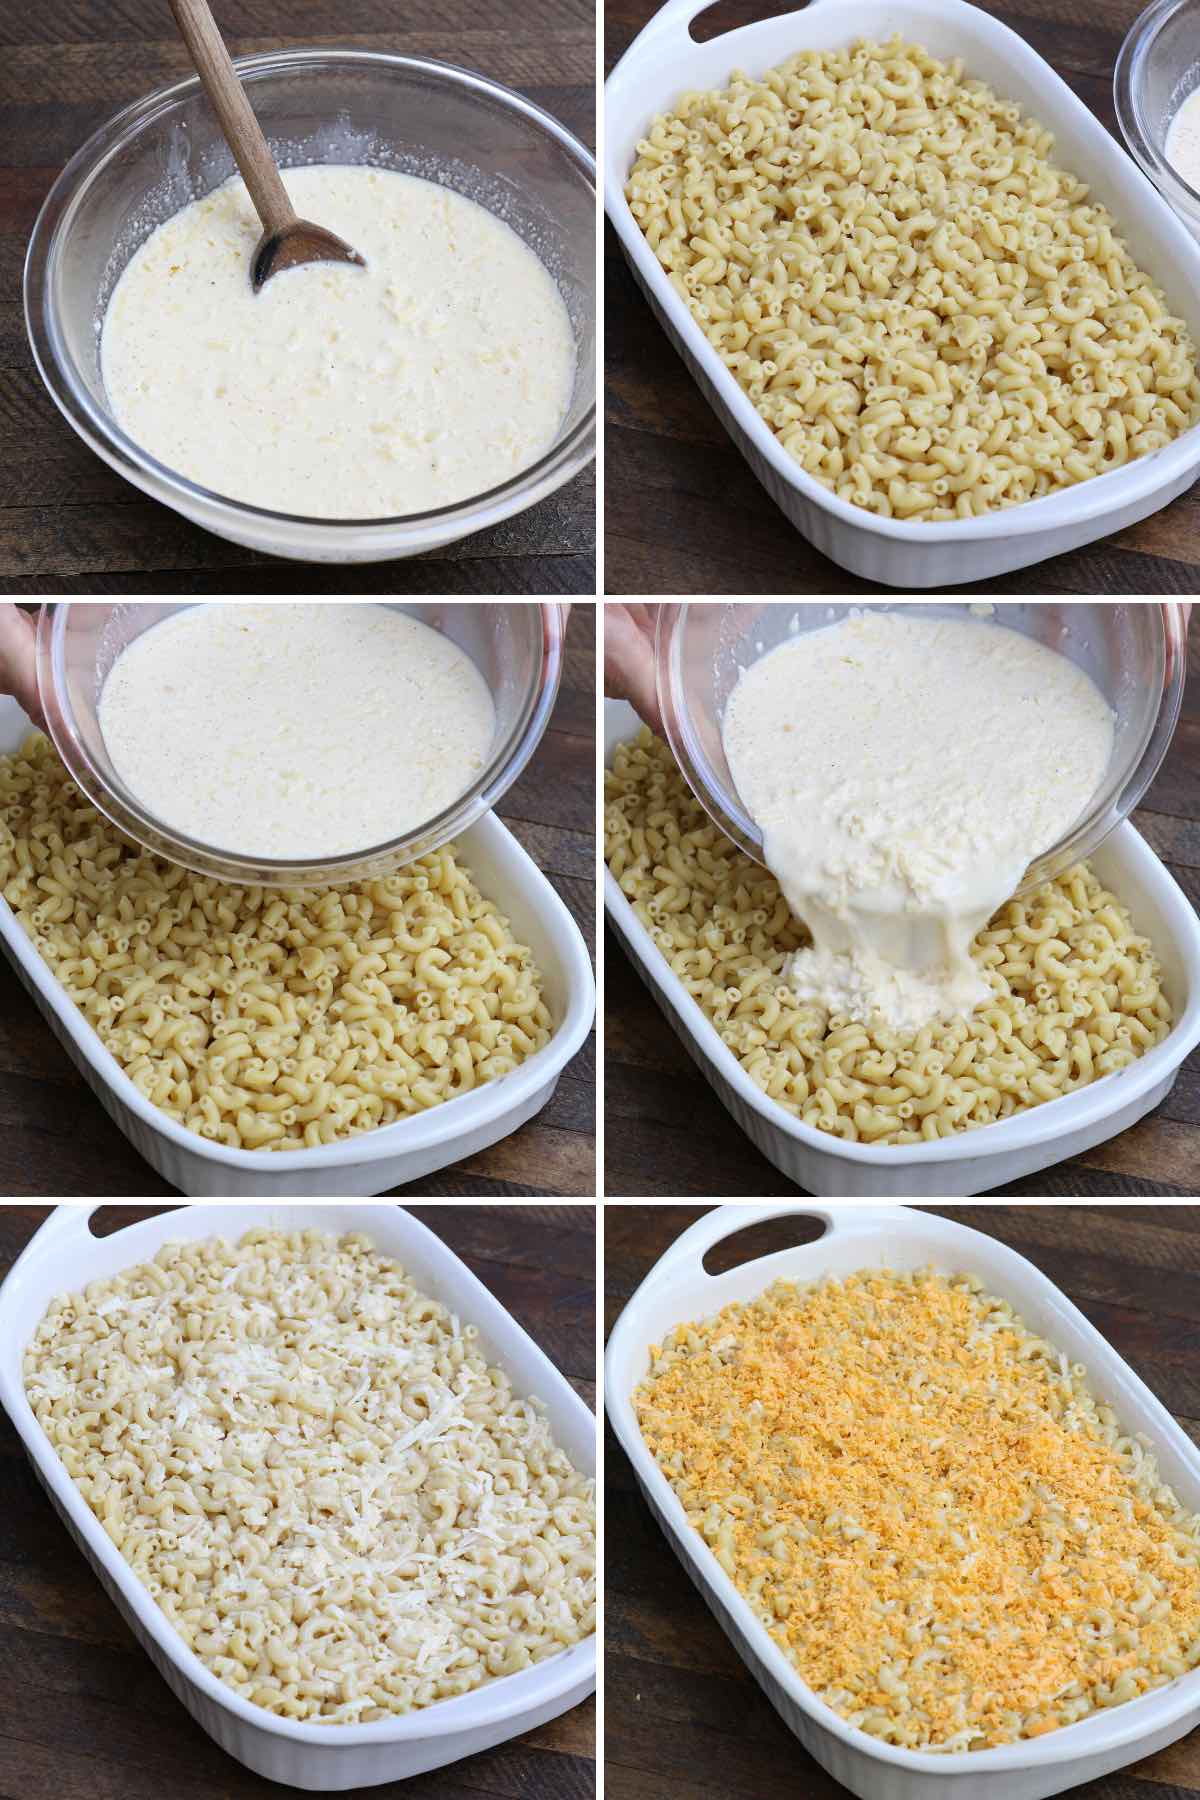 Steps for making baked macaroni and cheese